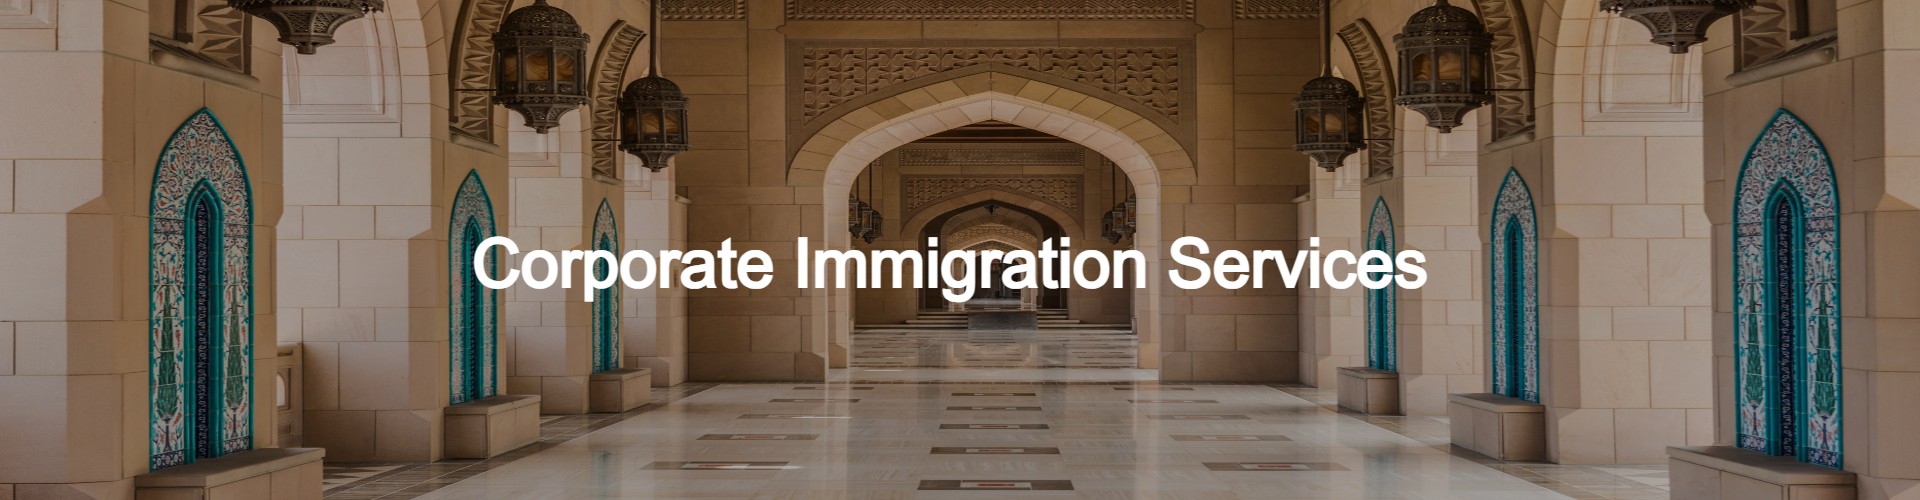 Corporate immigration services